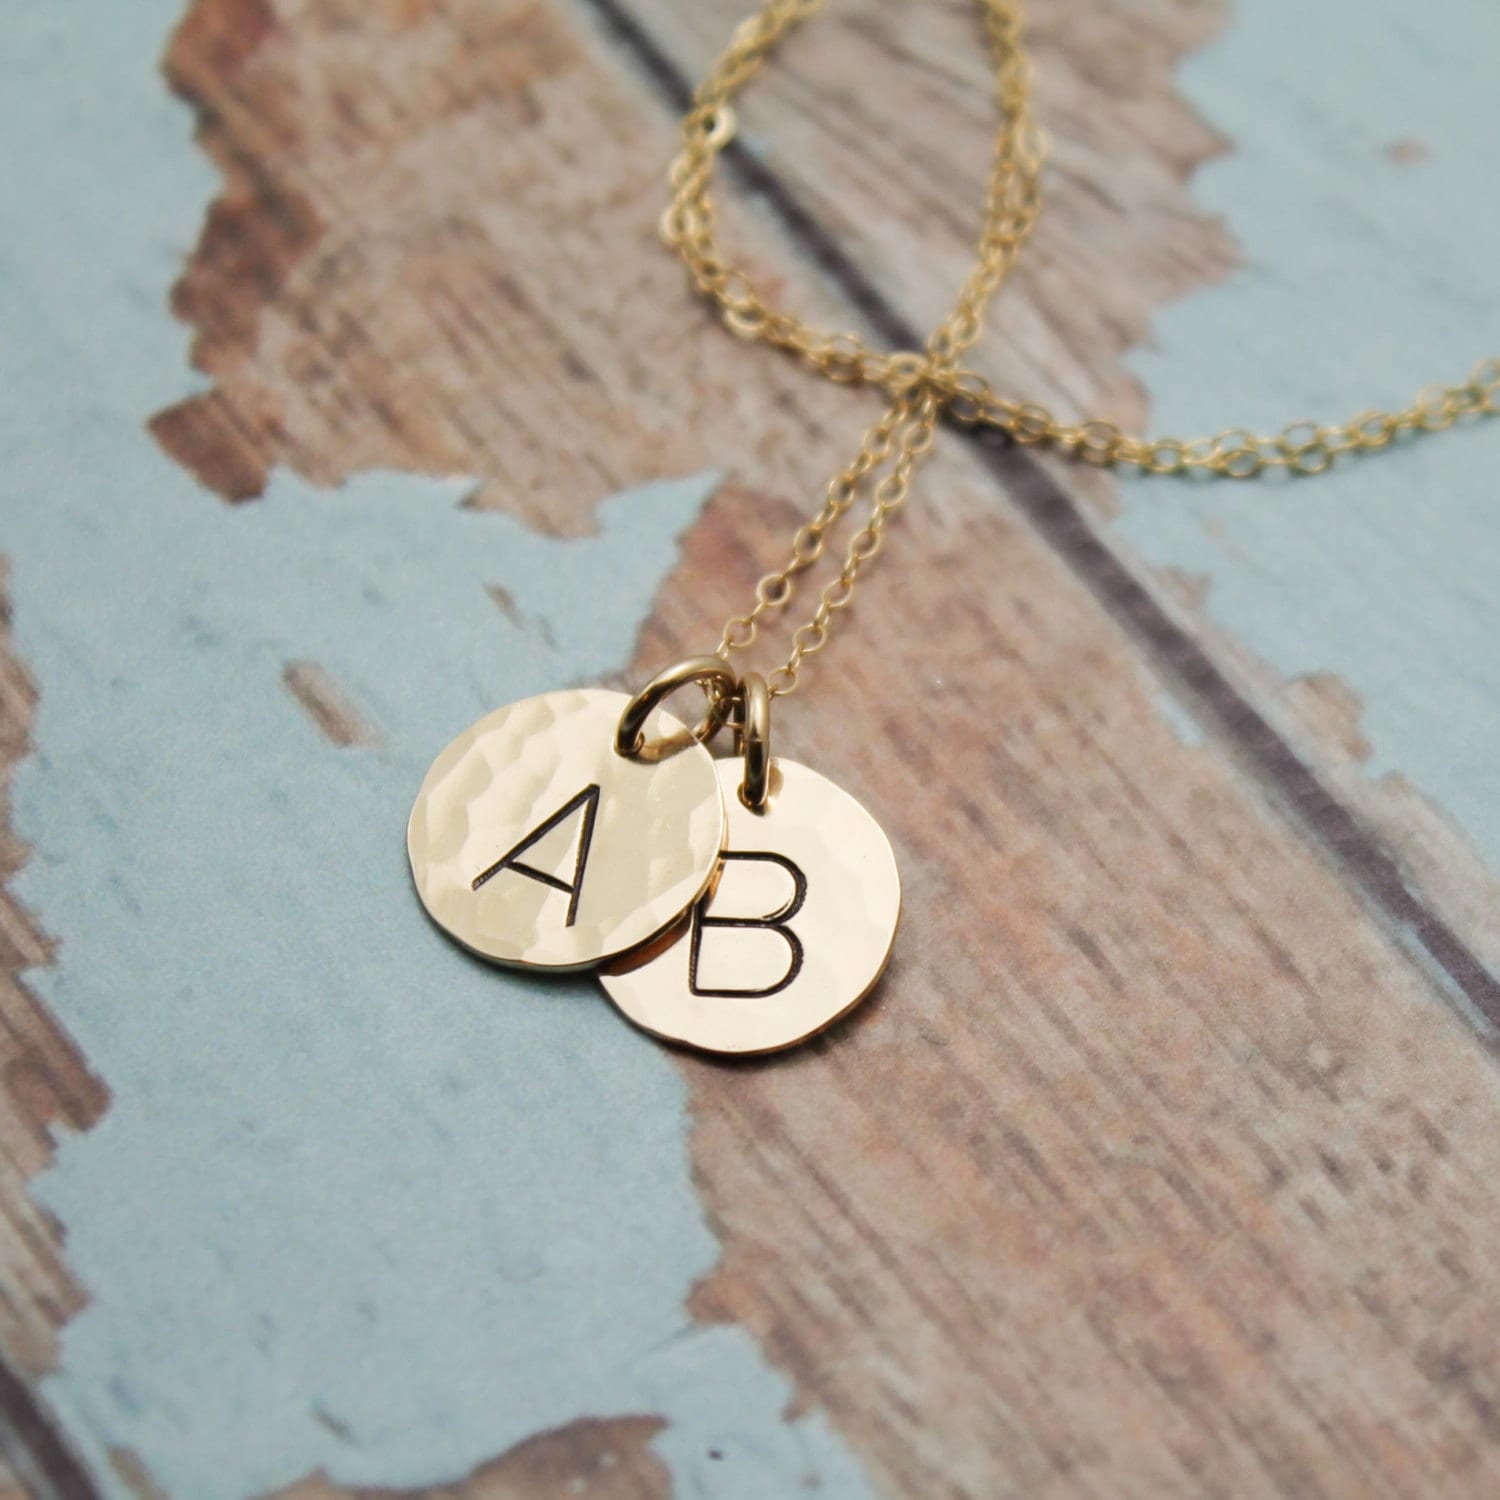 Two (2) 14K Gold Filled Initial Necklace Personalized Hand Stamped Jewelry